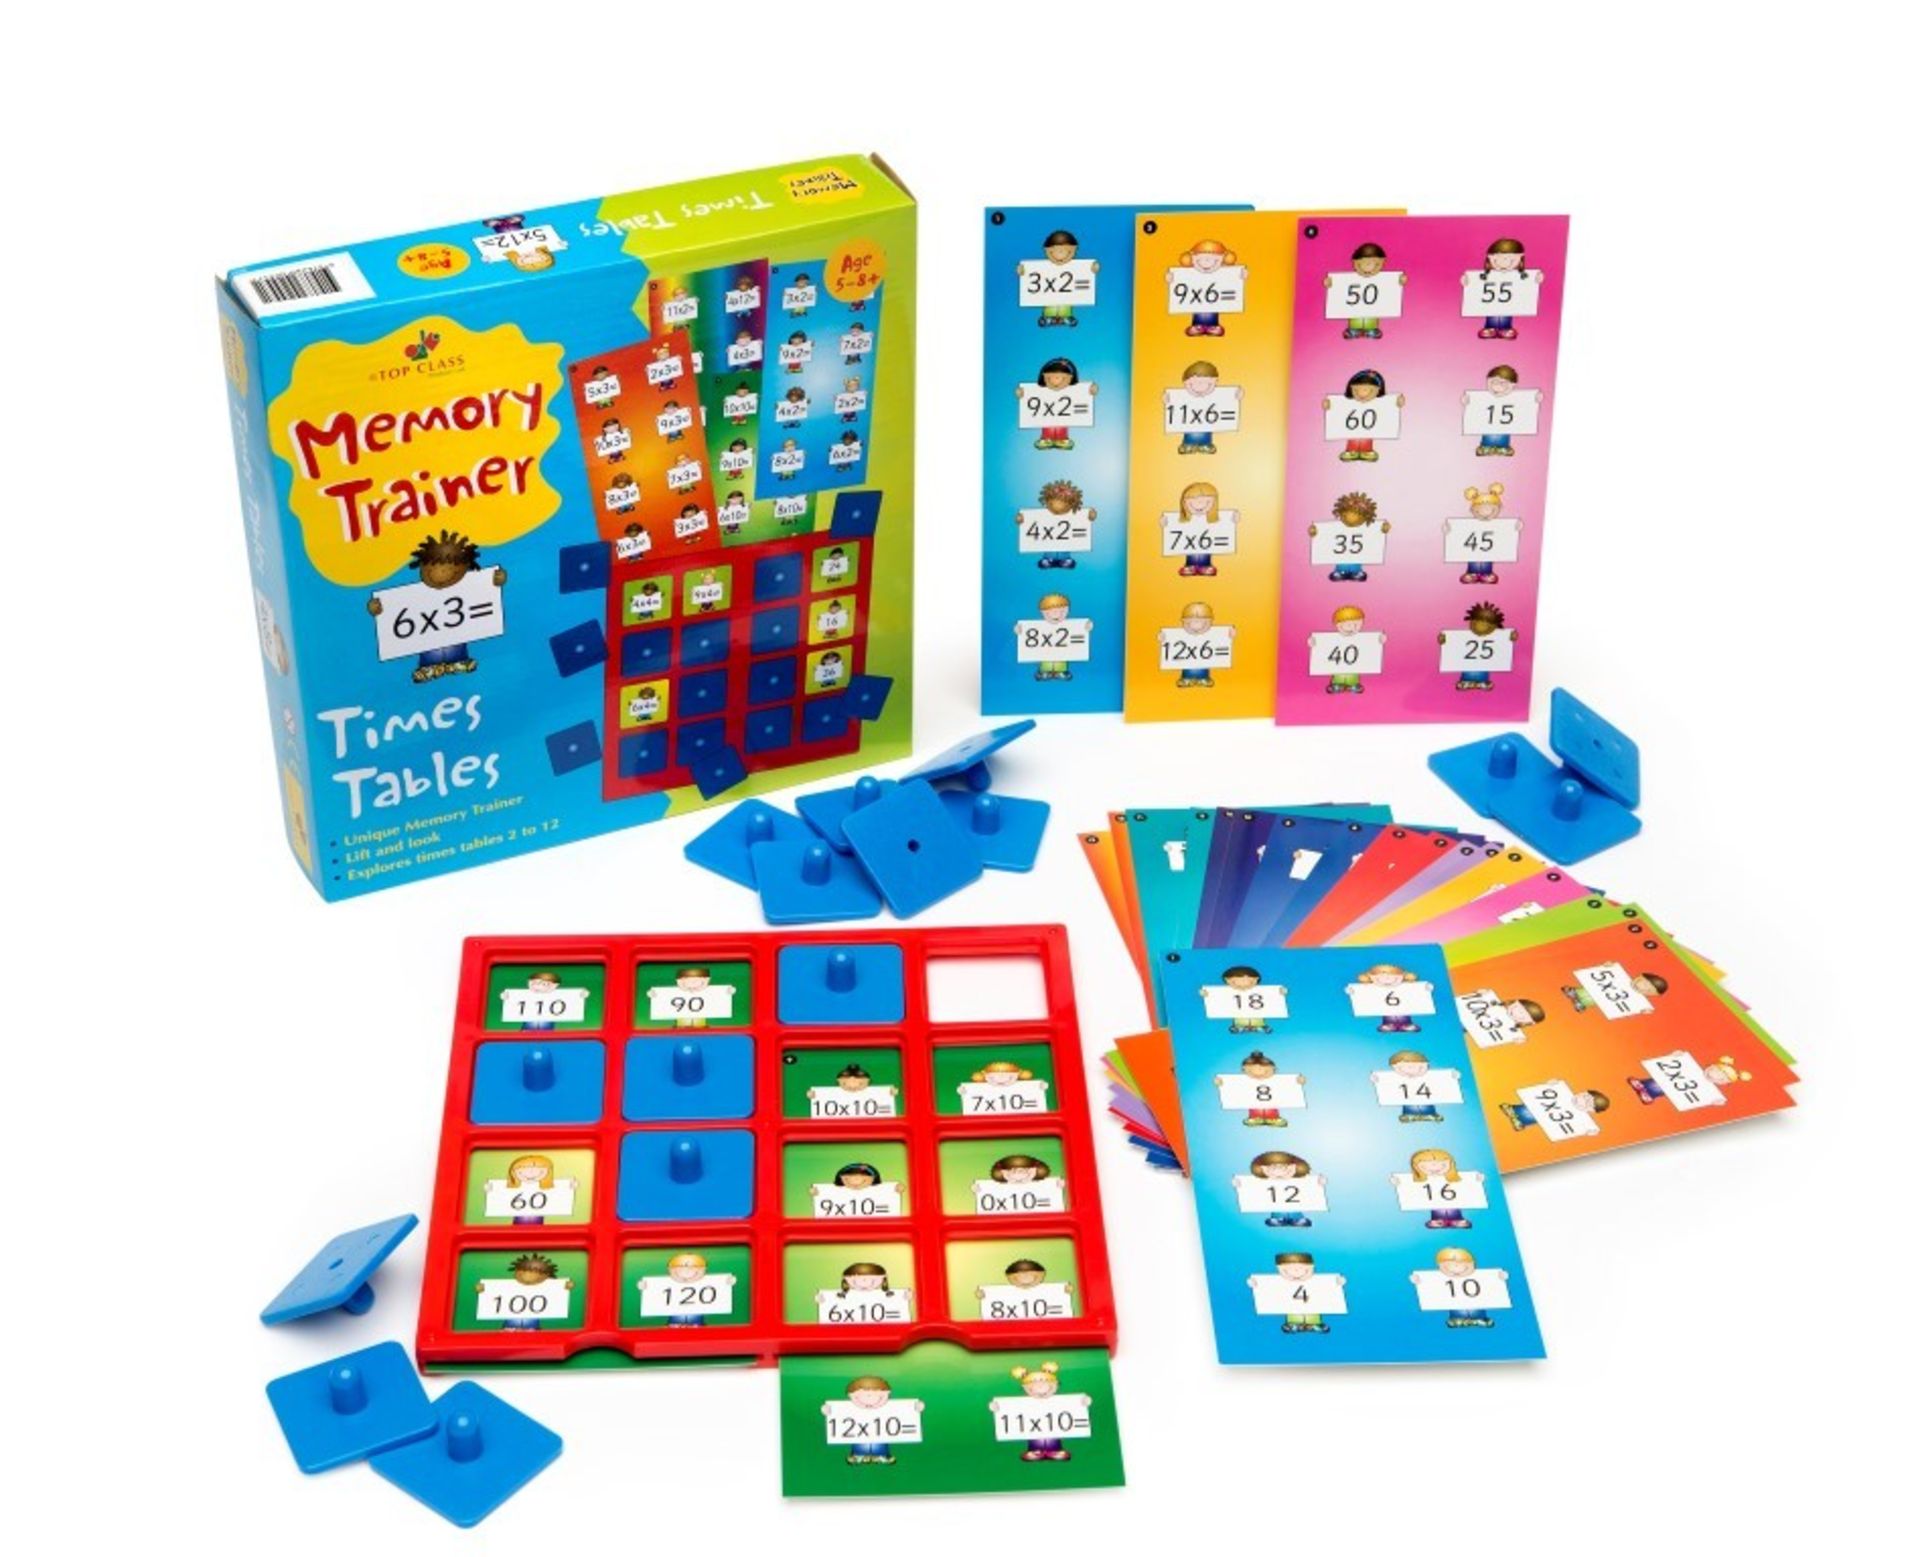 V *TRADE QTY* Brand New Top Class Lift & Look Memory Trainer Times Tables ISP £20.99 (Little